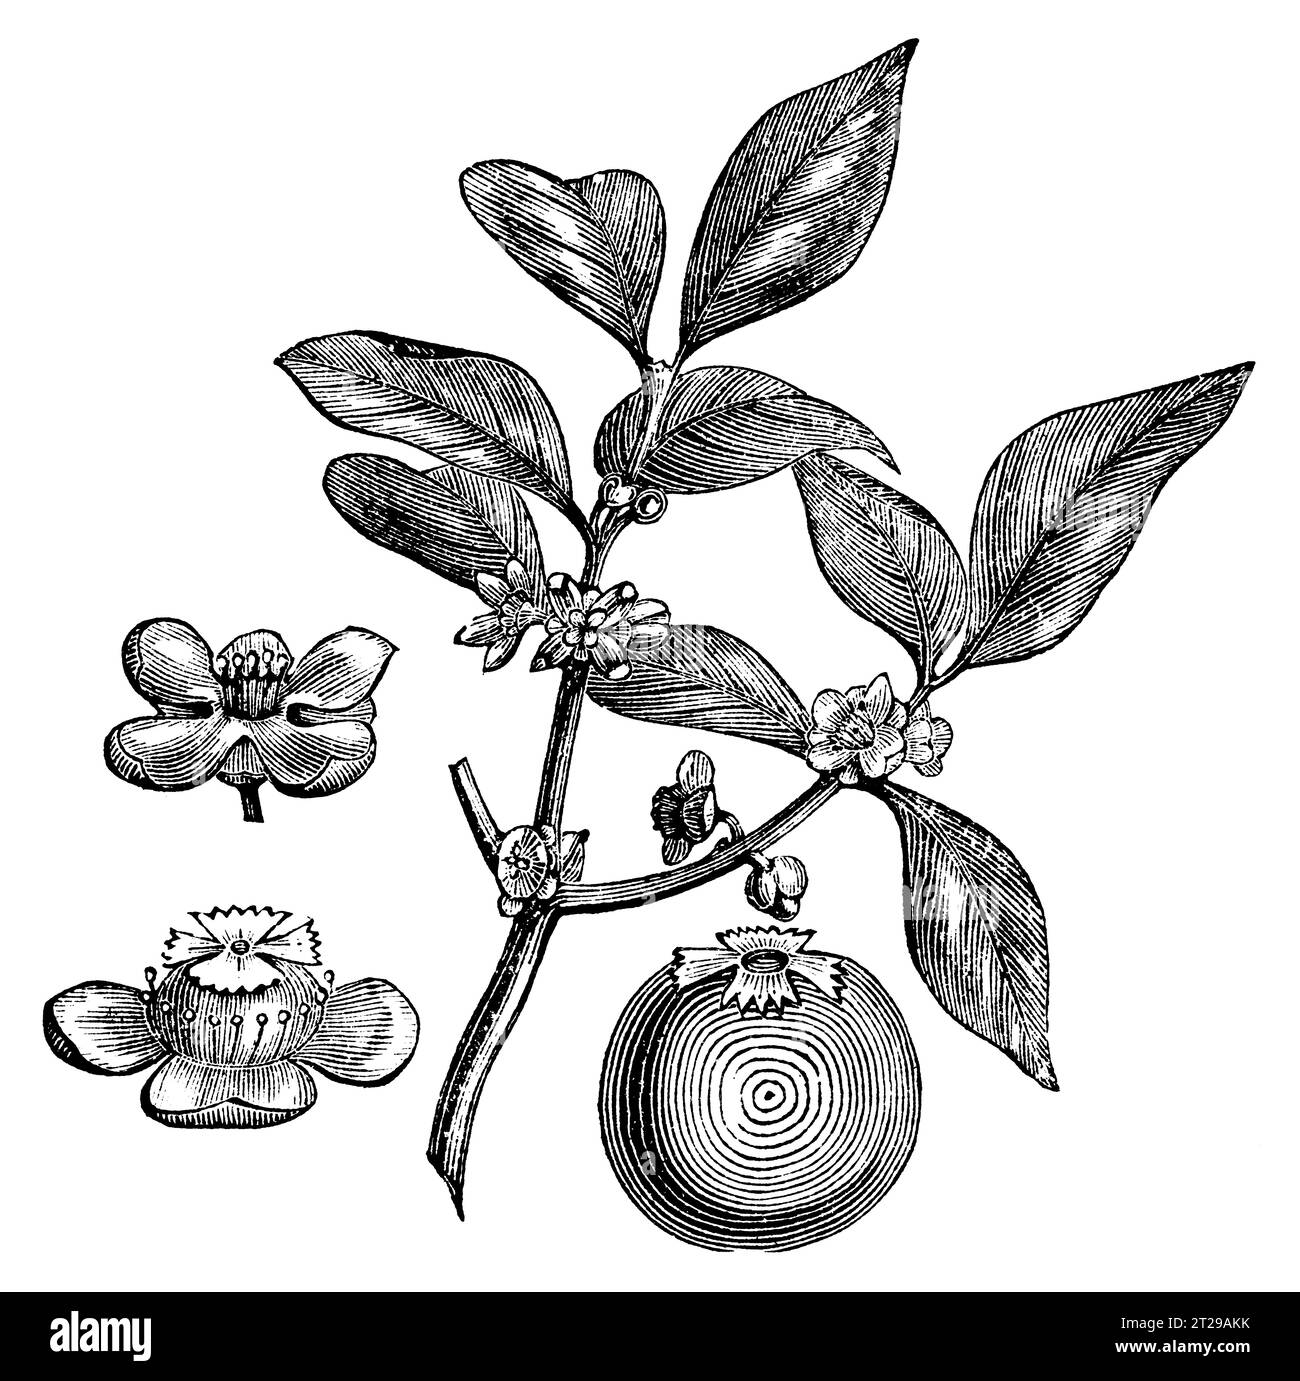 Garcinia cambogia, digitally restored from 'The Condensed American Encyclopedia' published in 1882. Stock Photo